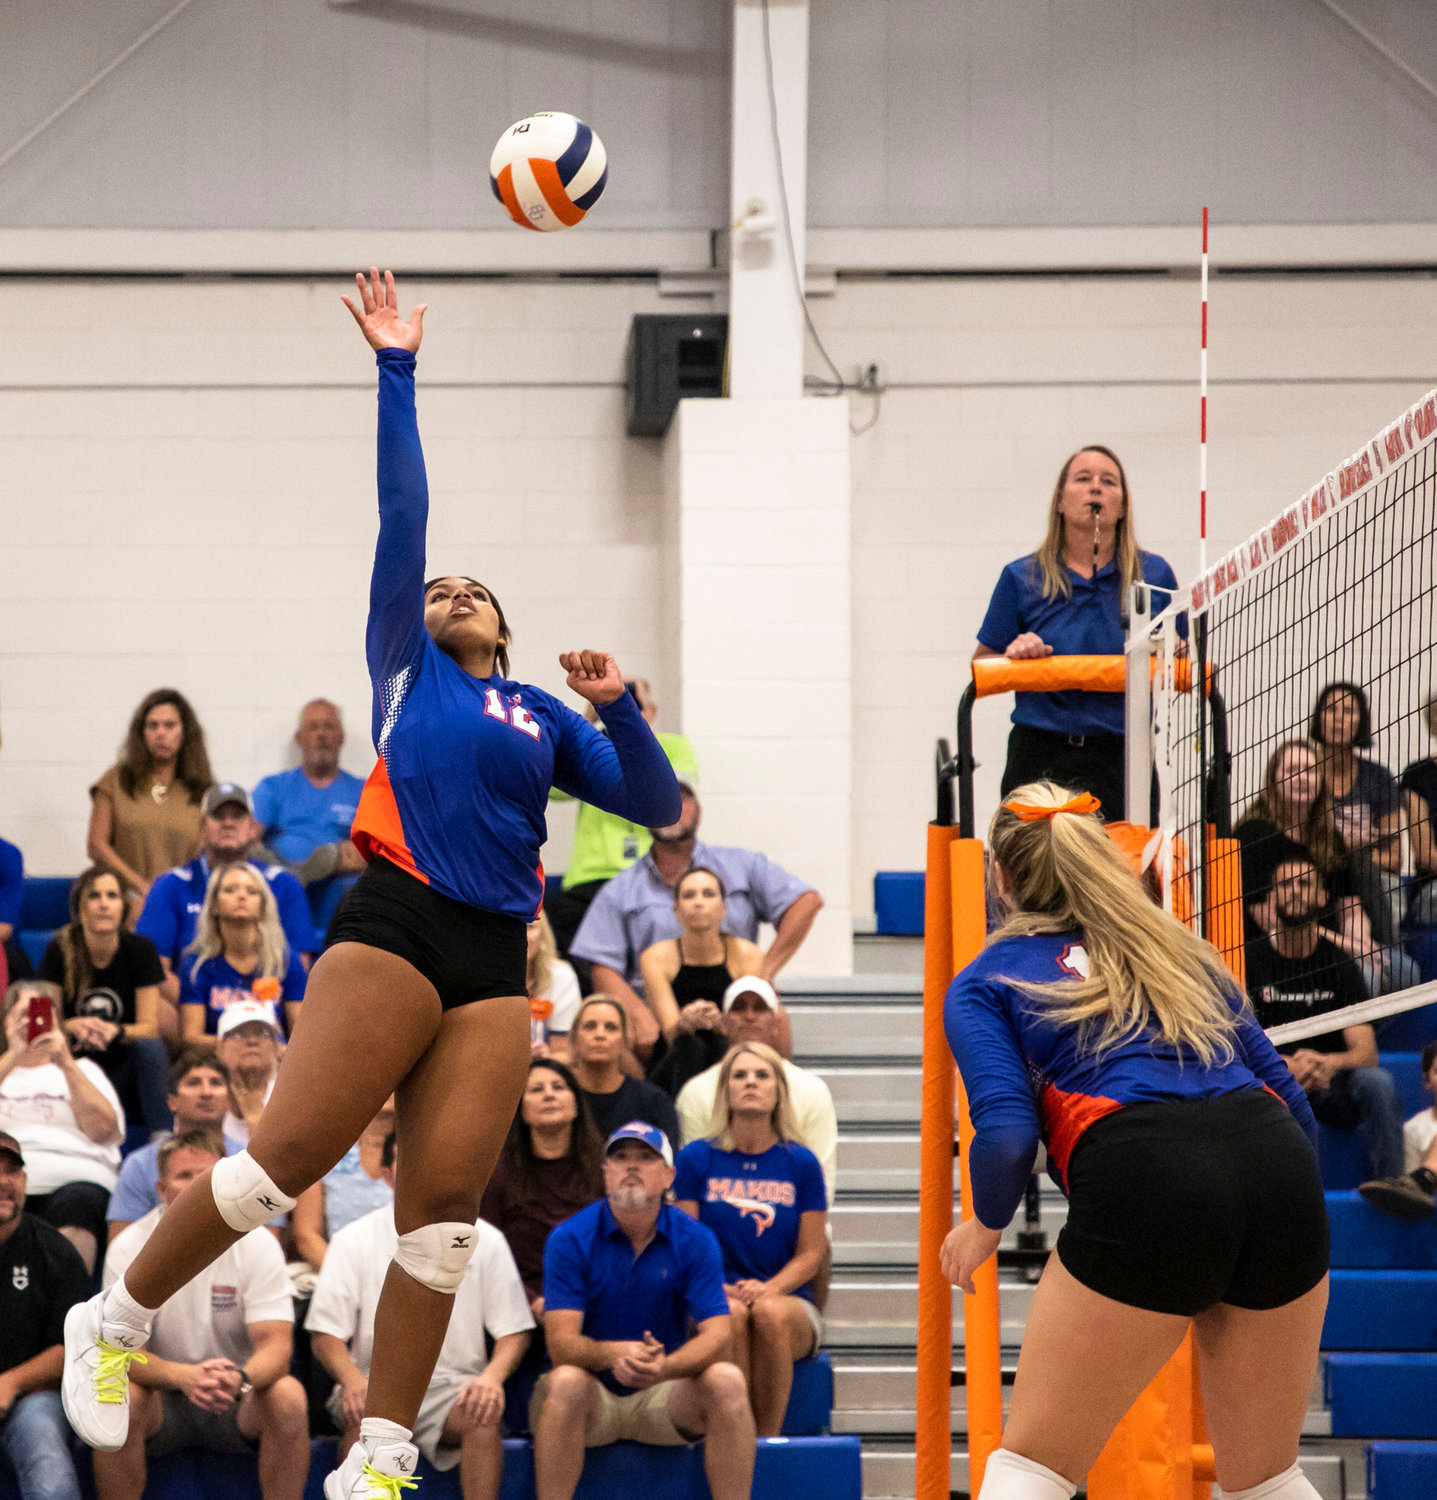 Orange Beach sophomore middle hitter Addie Roach soars for a spike during the Makos' home tri-match against the Gulf Shores Dolphins Thursday, Aug. 25. Orange Beach extended its winning streak to open the season after it won its host tournament, the Battle at the Beach, last weekend.